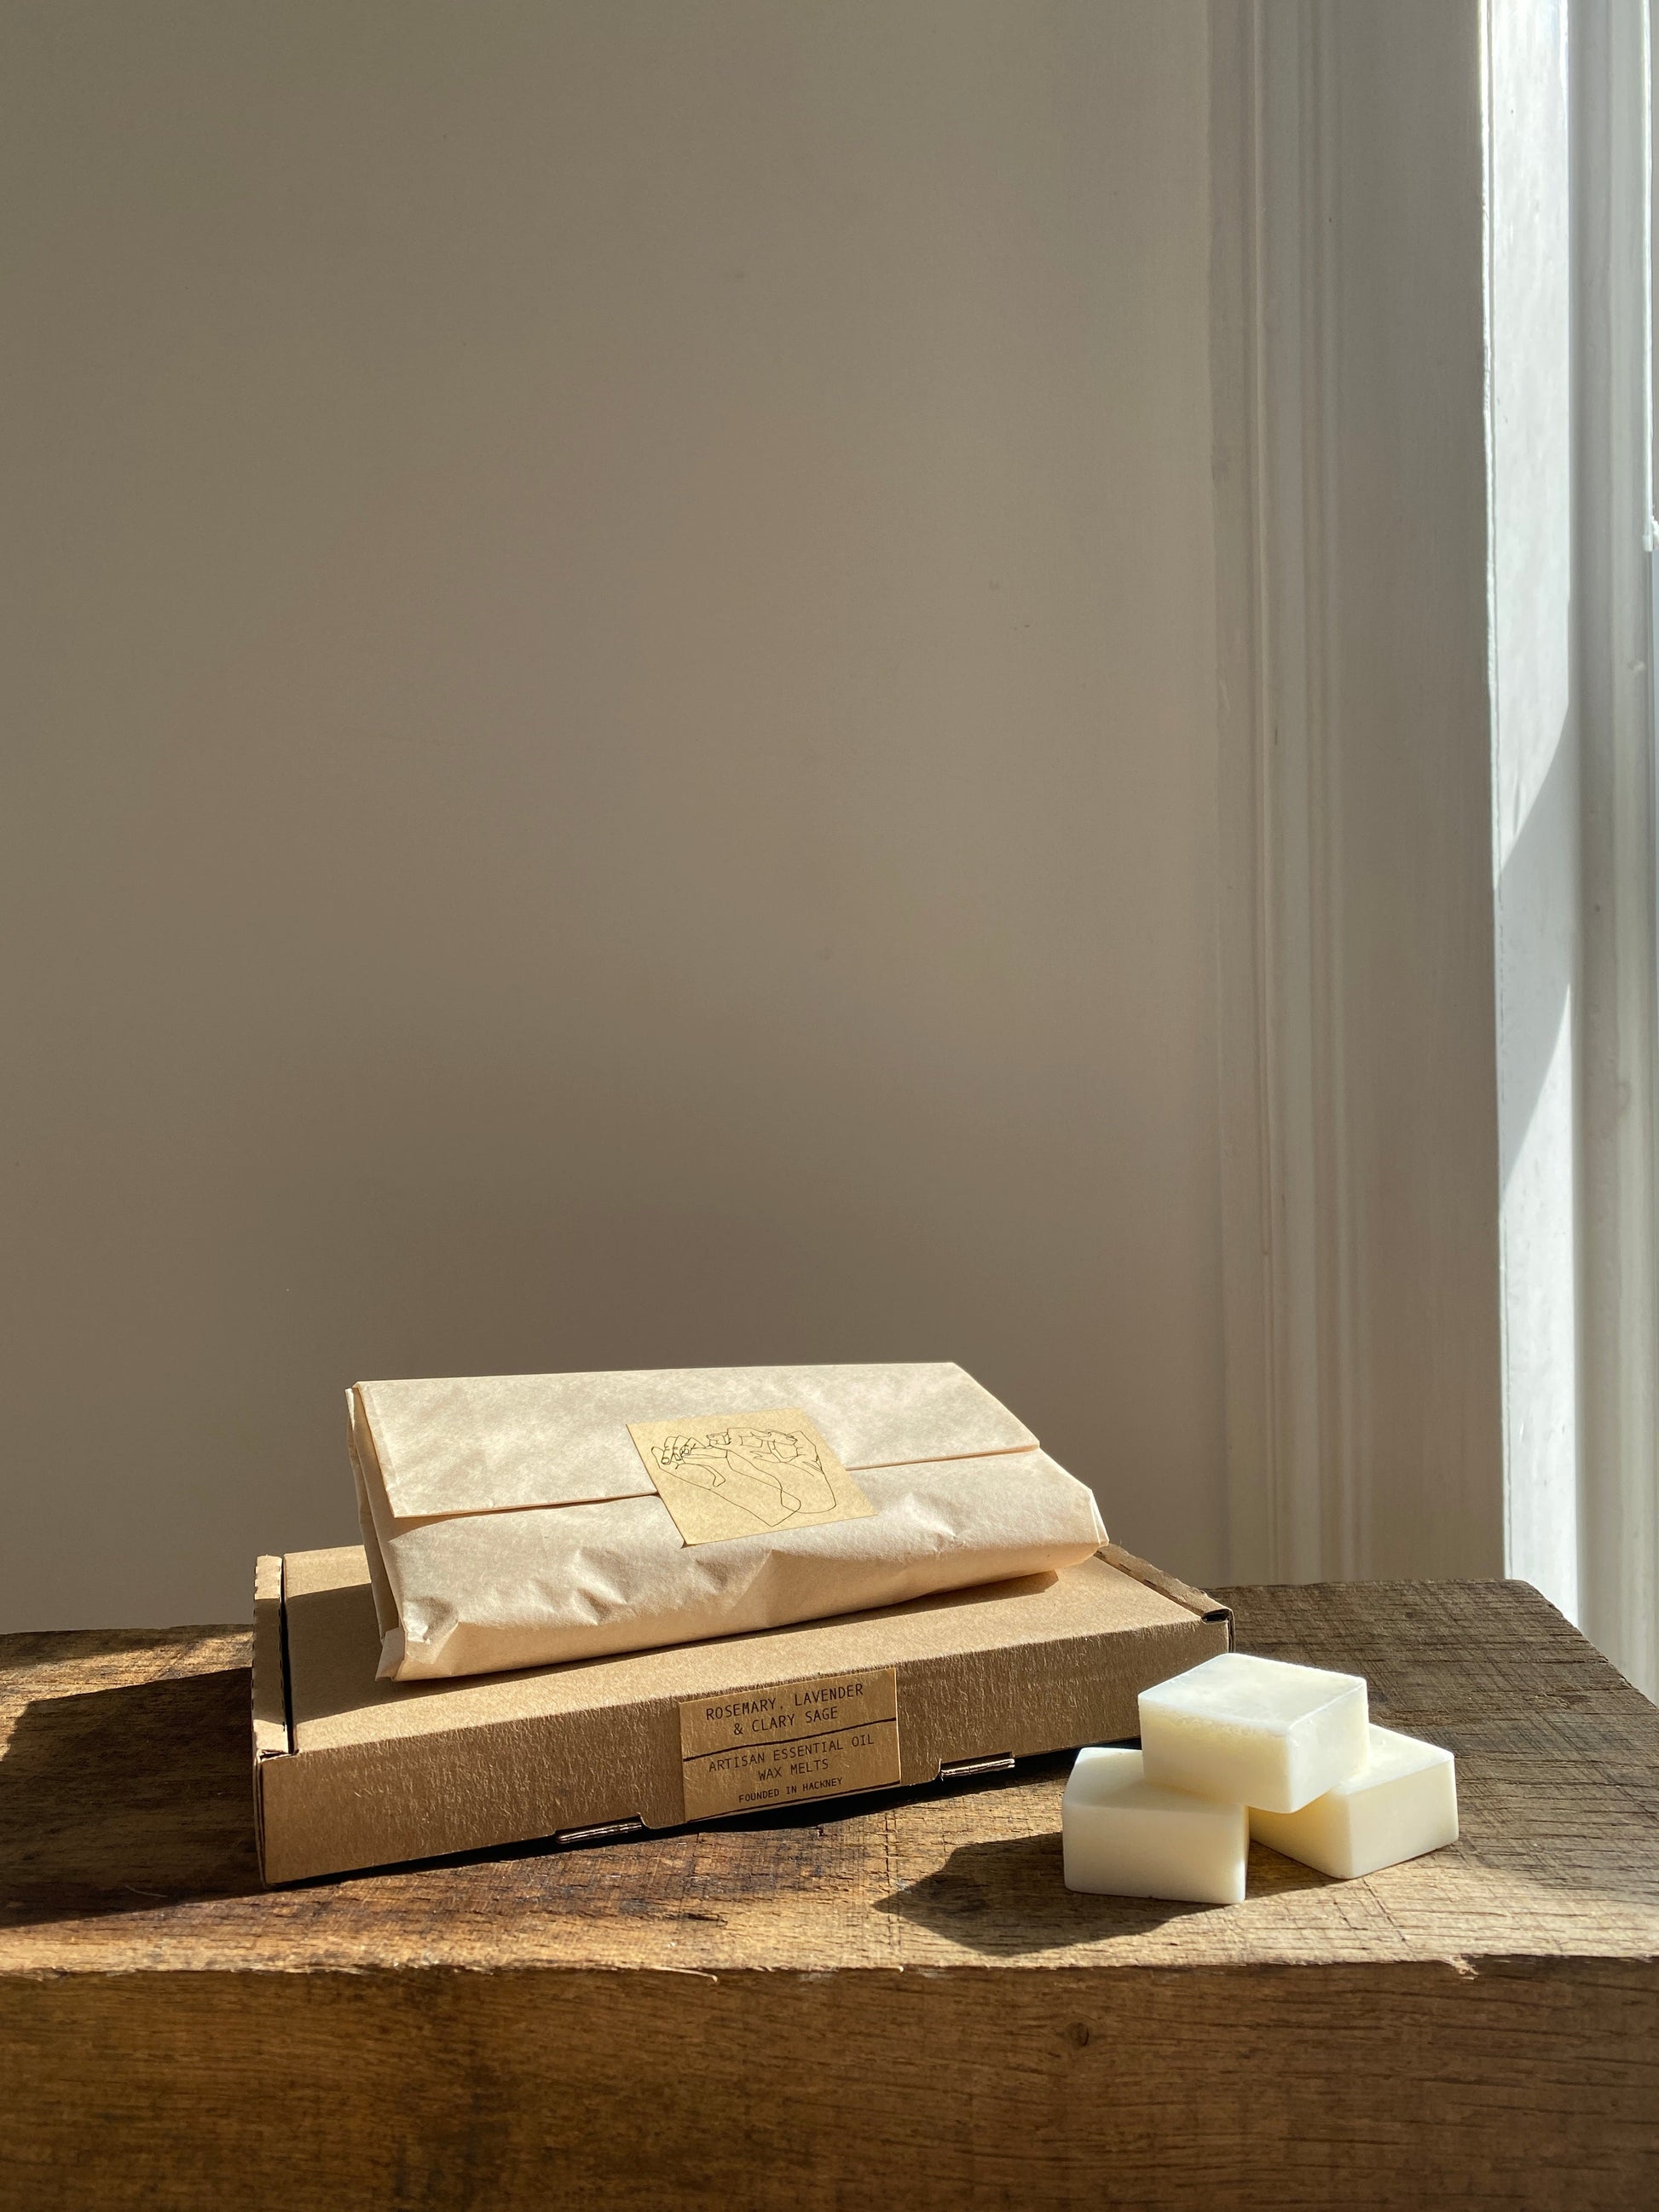 Local natural wax melt subscription box made in East London and Brighton